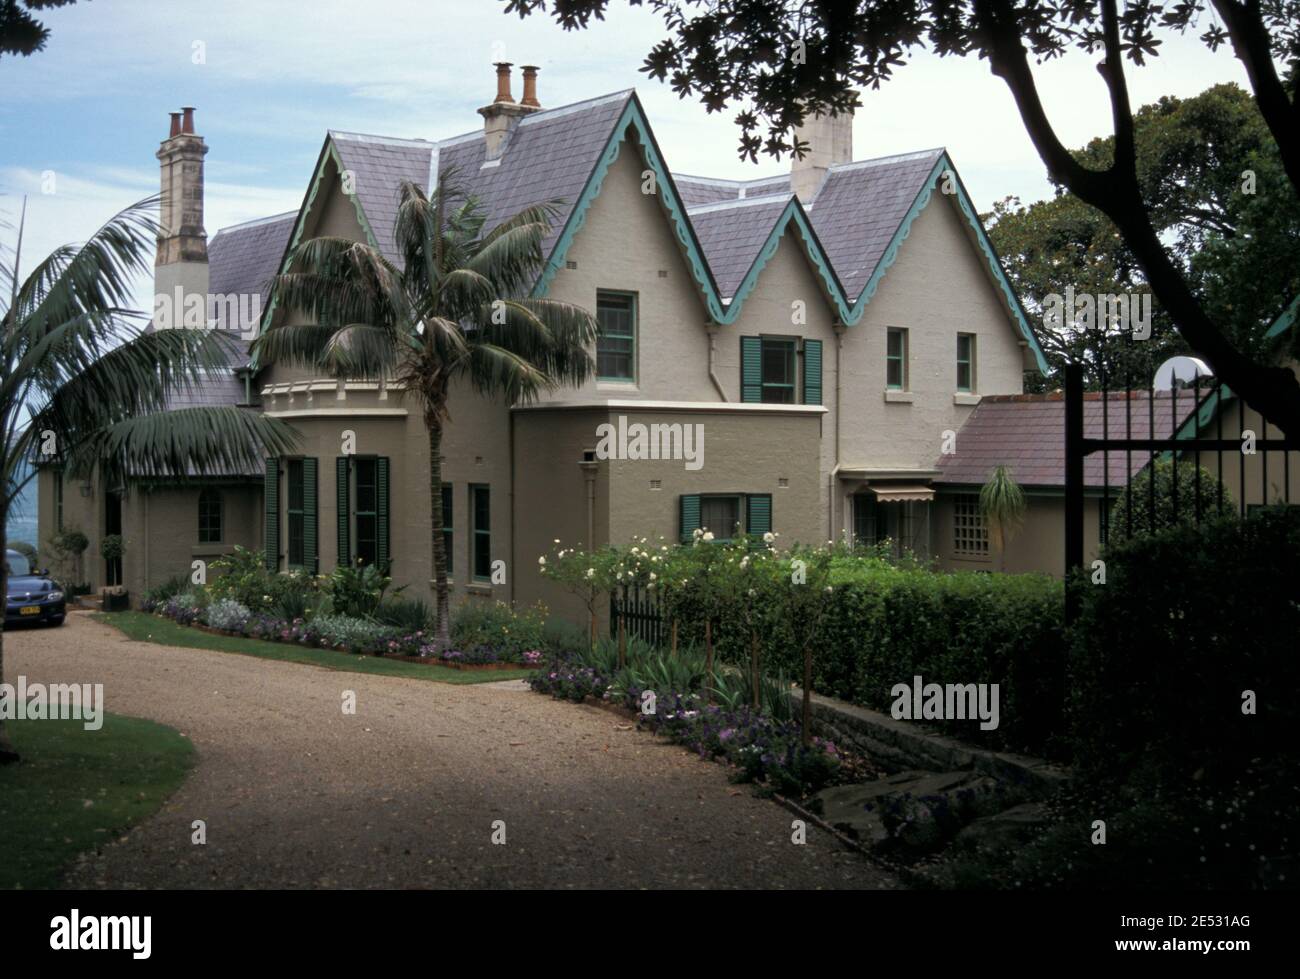 KIRRIBILLI HOUSE (KNOWN AS THE LODGE, OFFICIAL RESIDENCE OF THE PRIME MINISTER OF AUSTRALIA) SYDNEY, NSW, AUSTRALIA Stock Photo